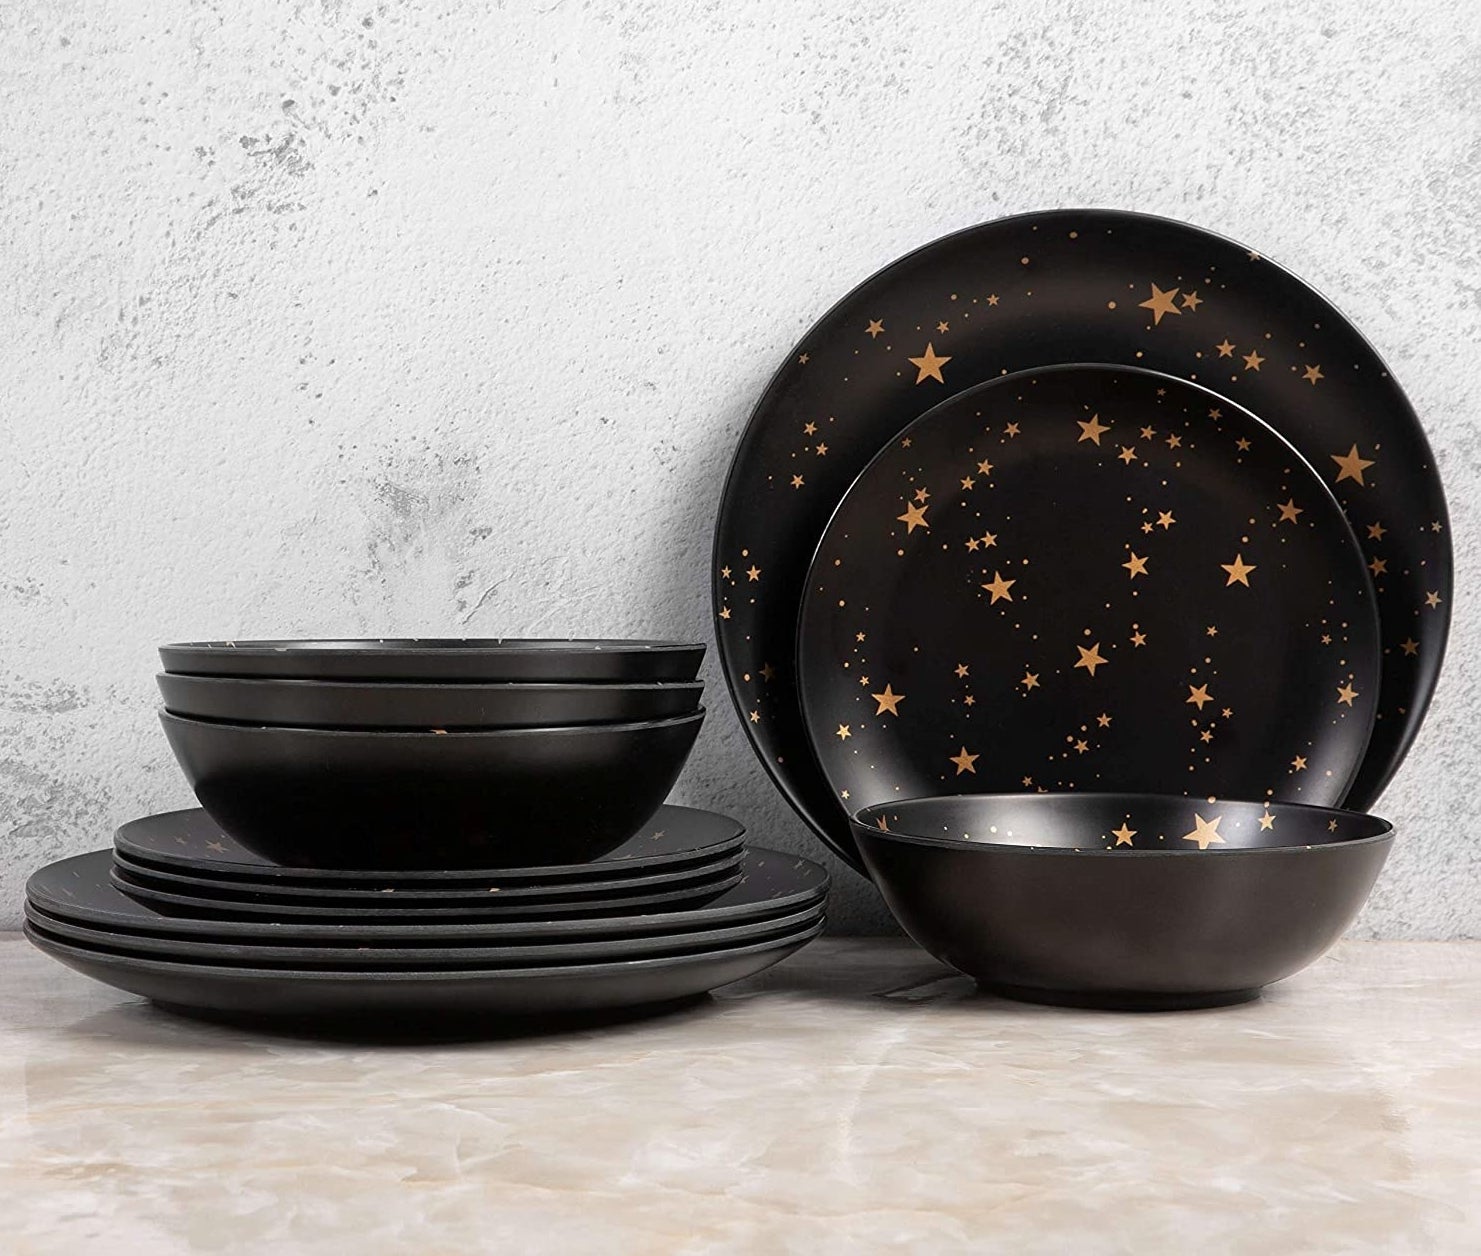 the black dinner plate set with stars on it